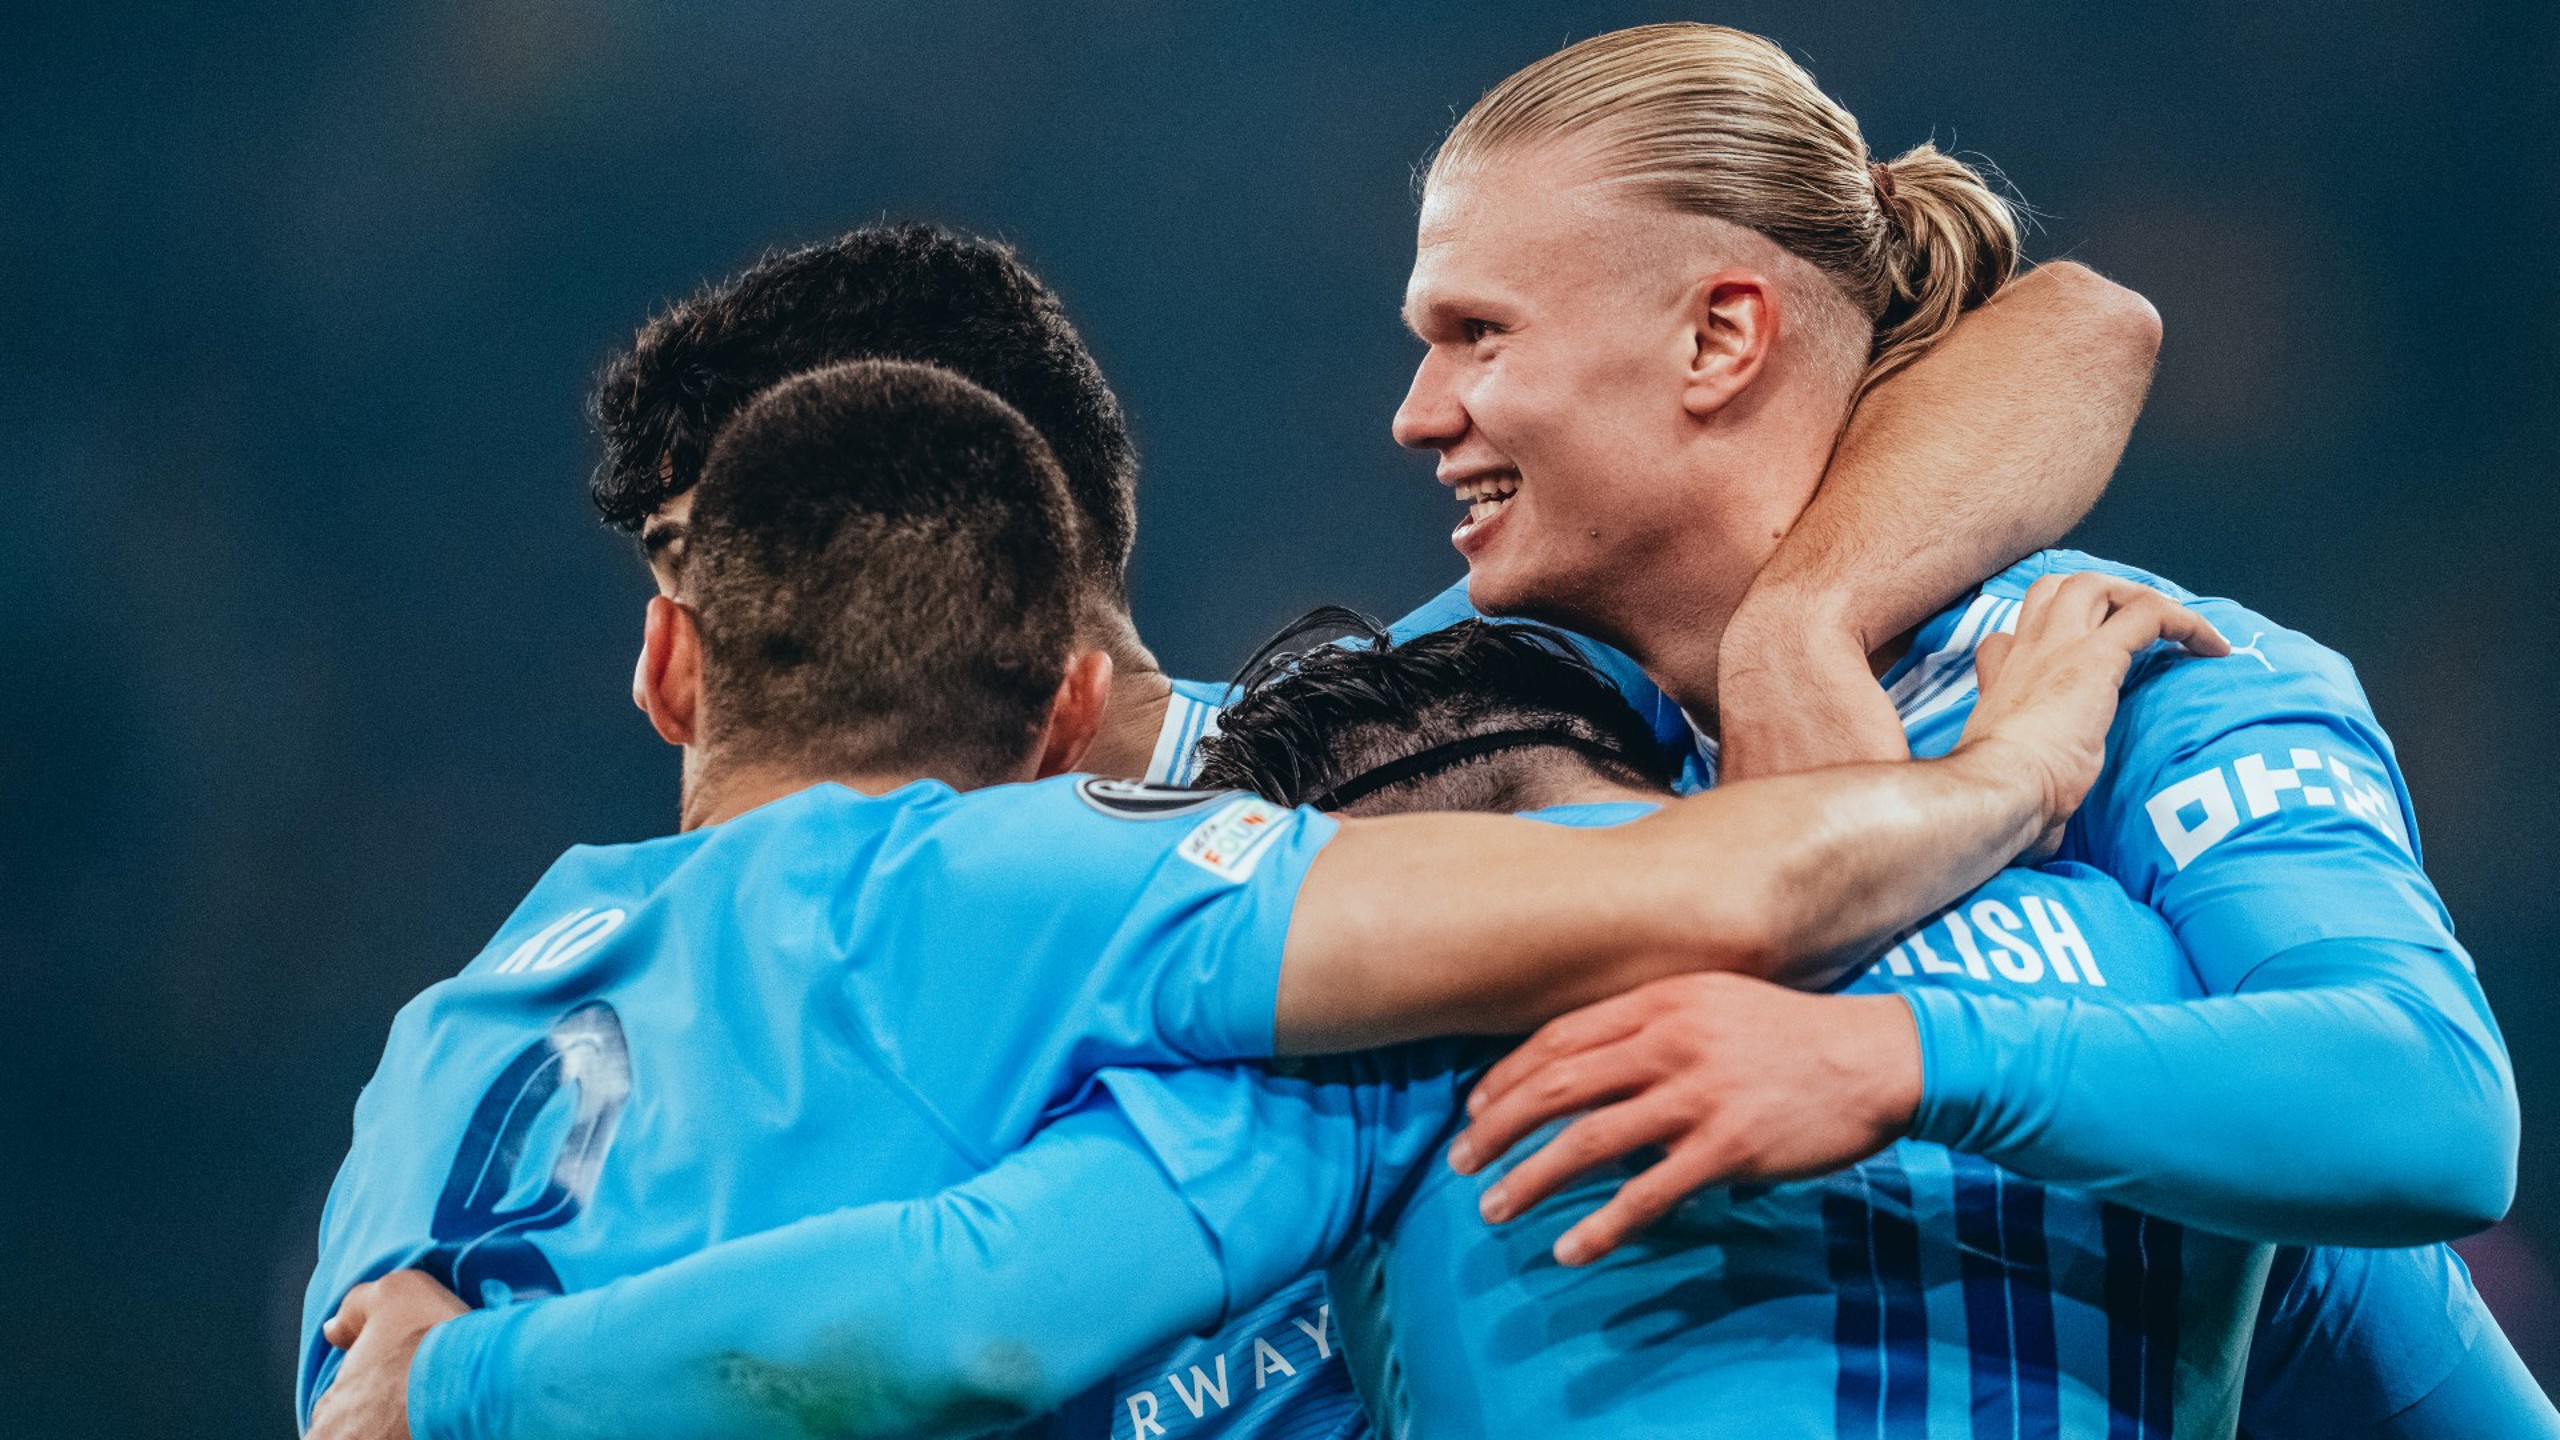 City maintain perfect Champions League start to secure spot in Round of 16